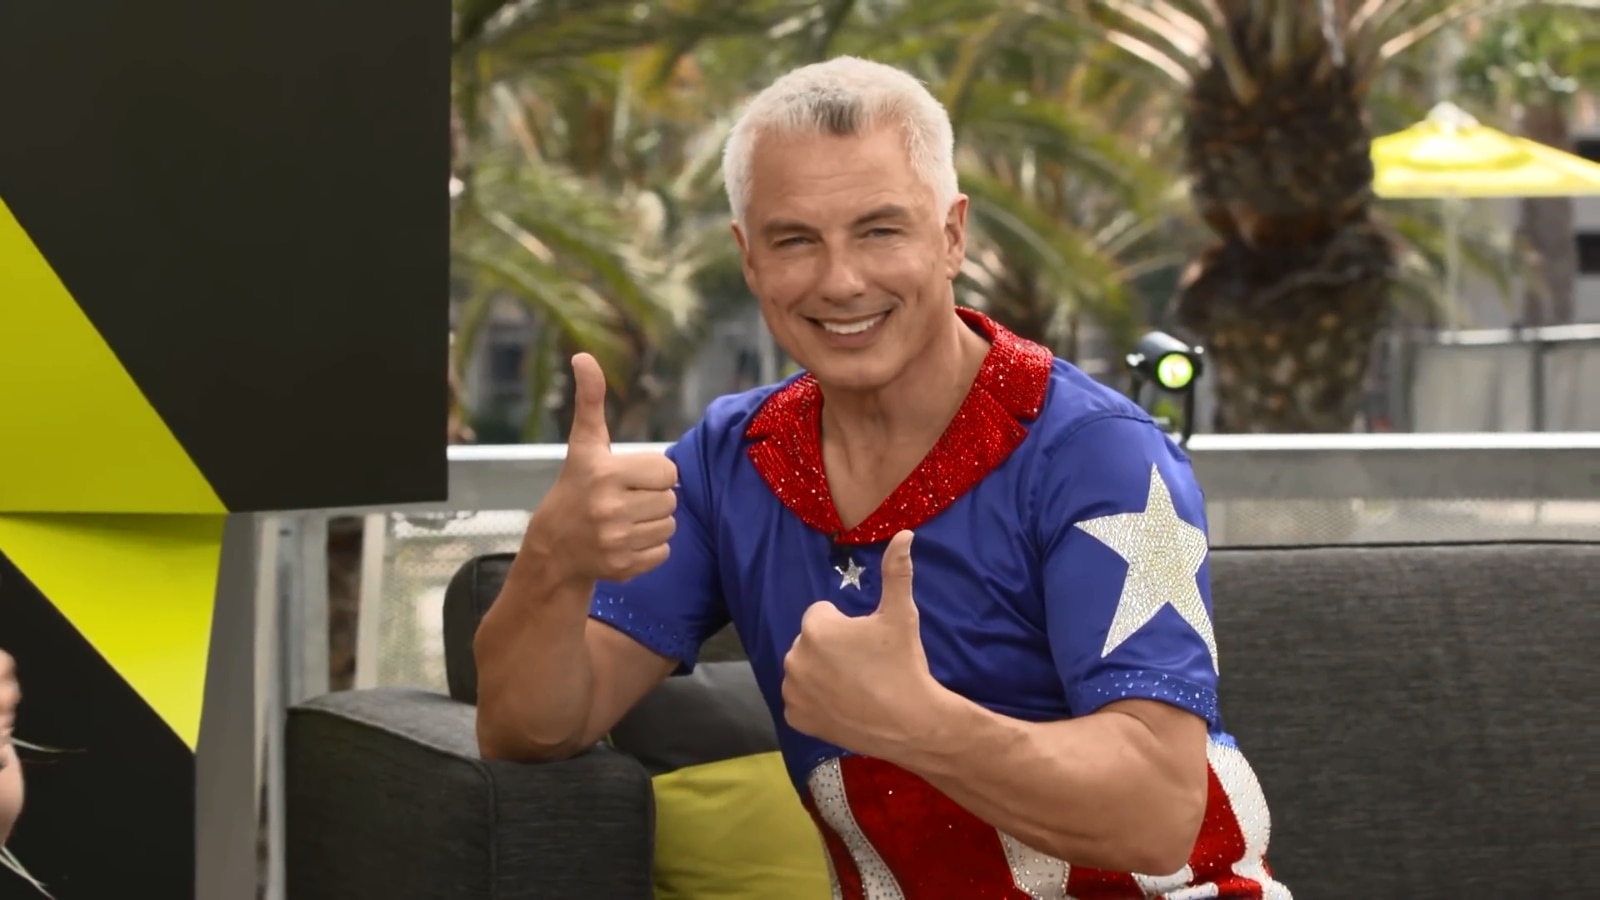 Watch Sdcc John Barrowman Cosplays As Captain America And Wants A Images, Photos, Reviews